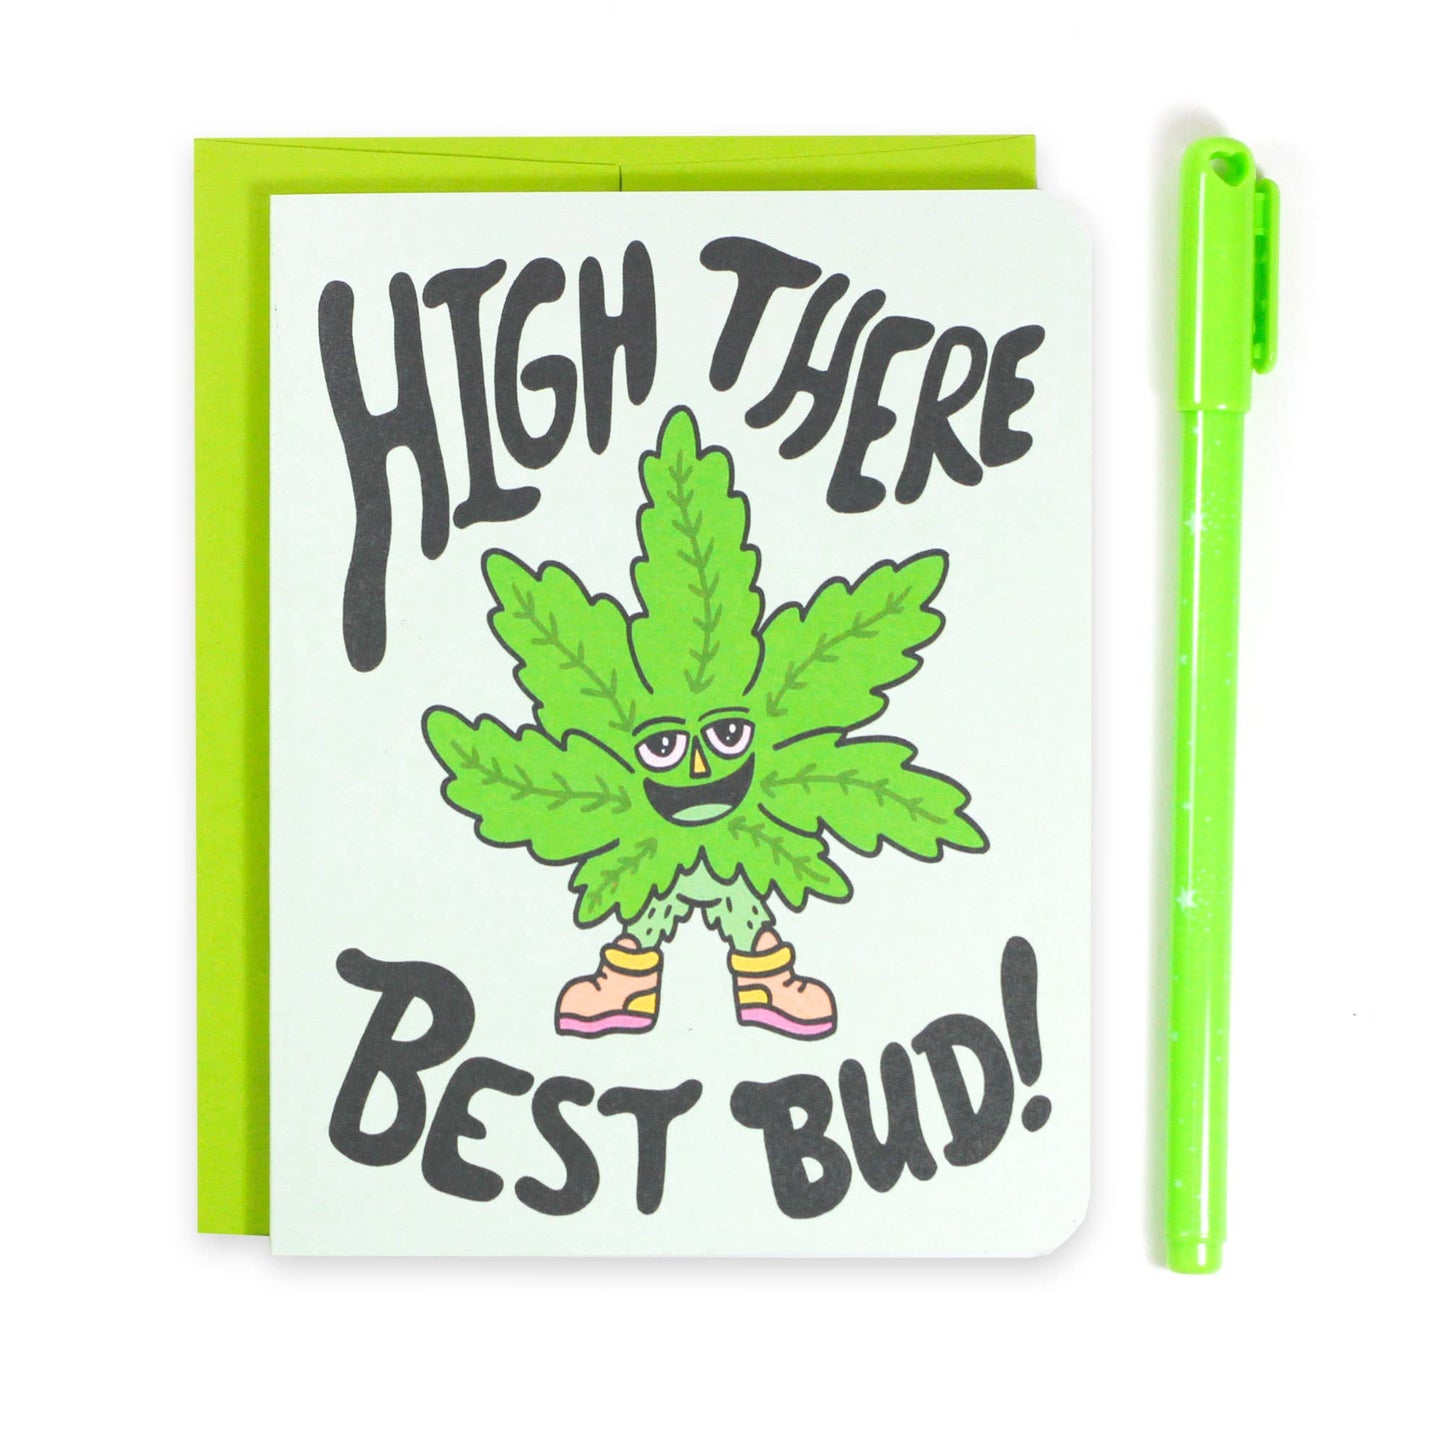 High There Best Bud Card